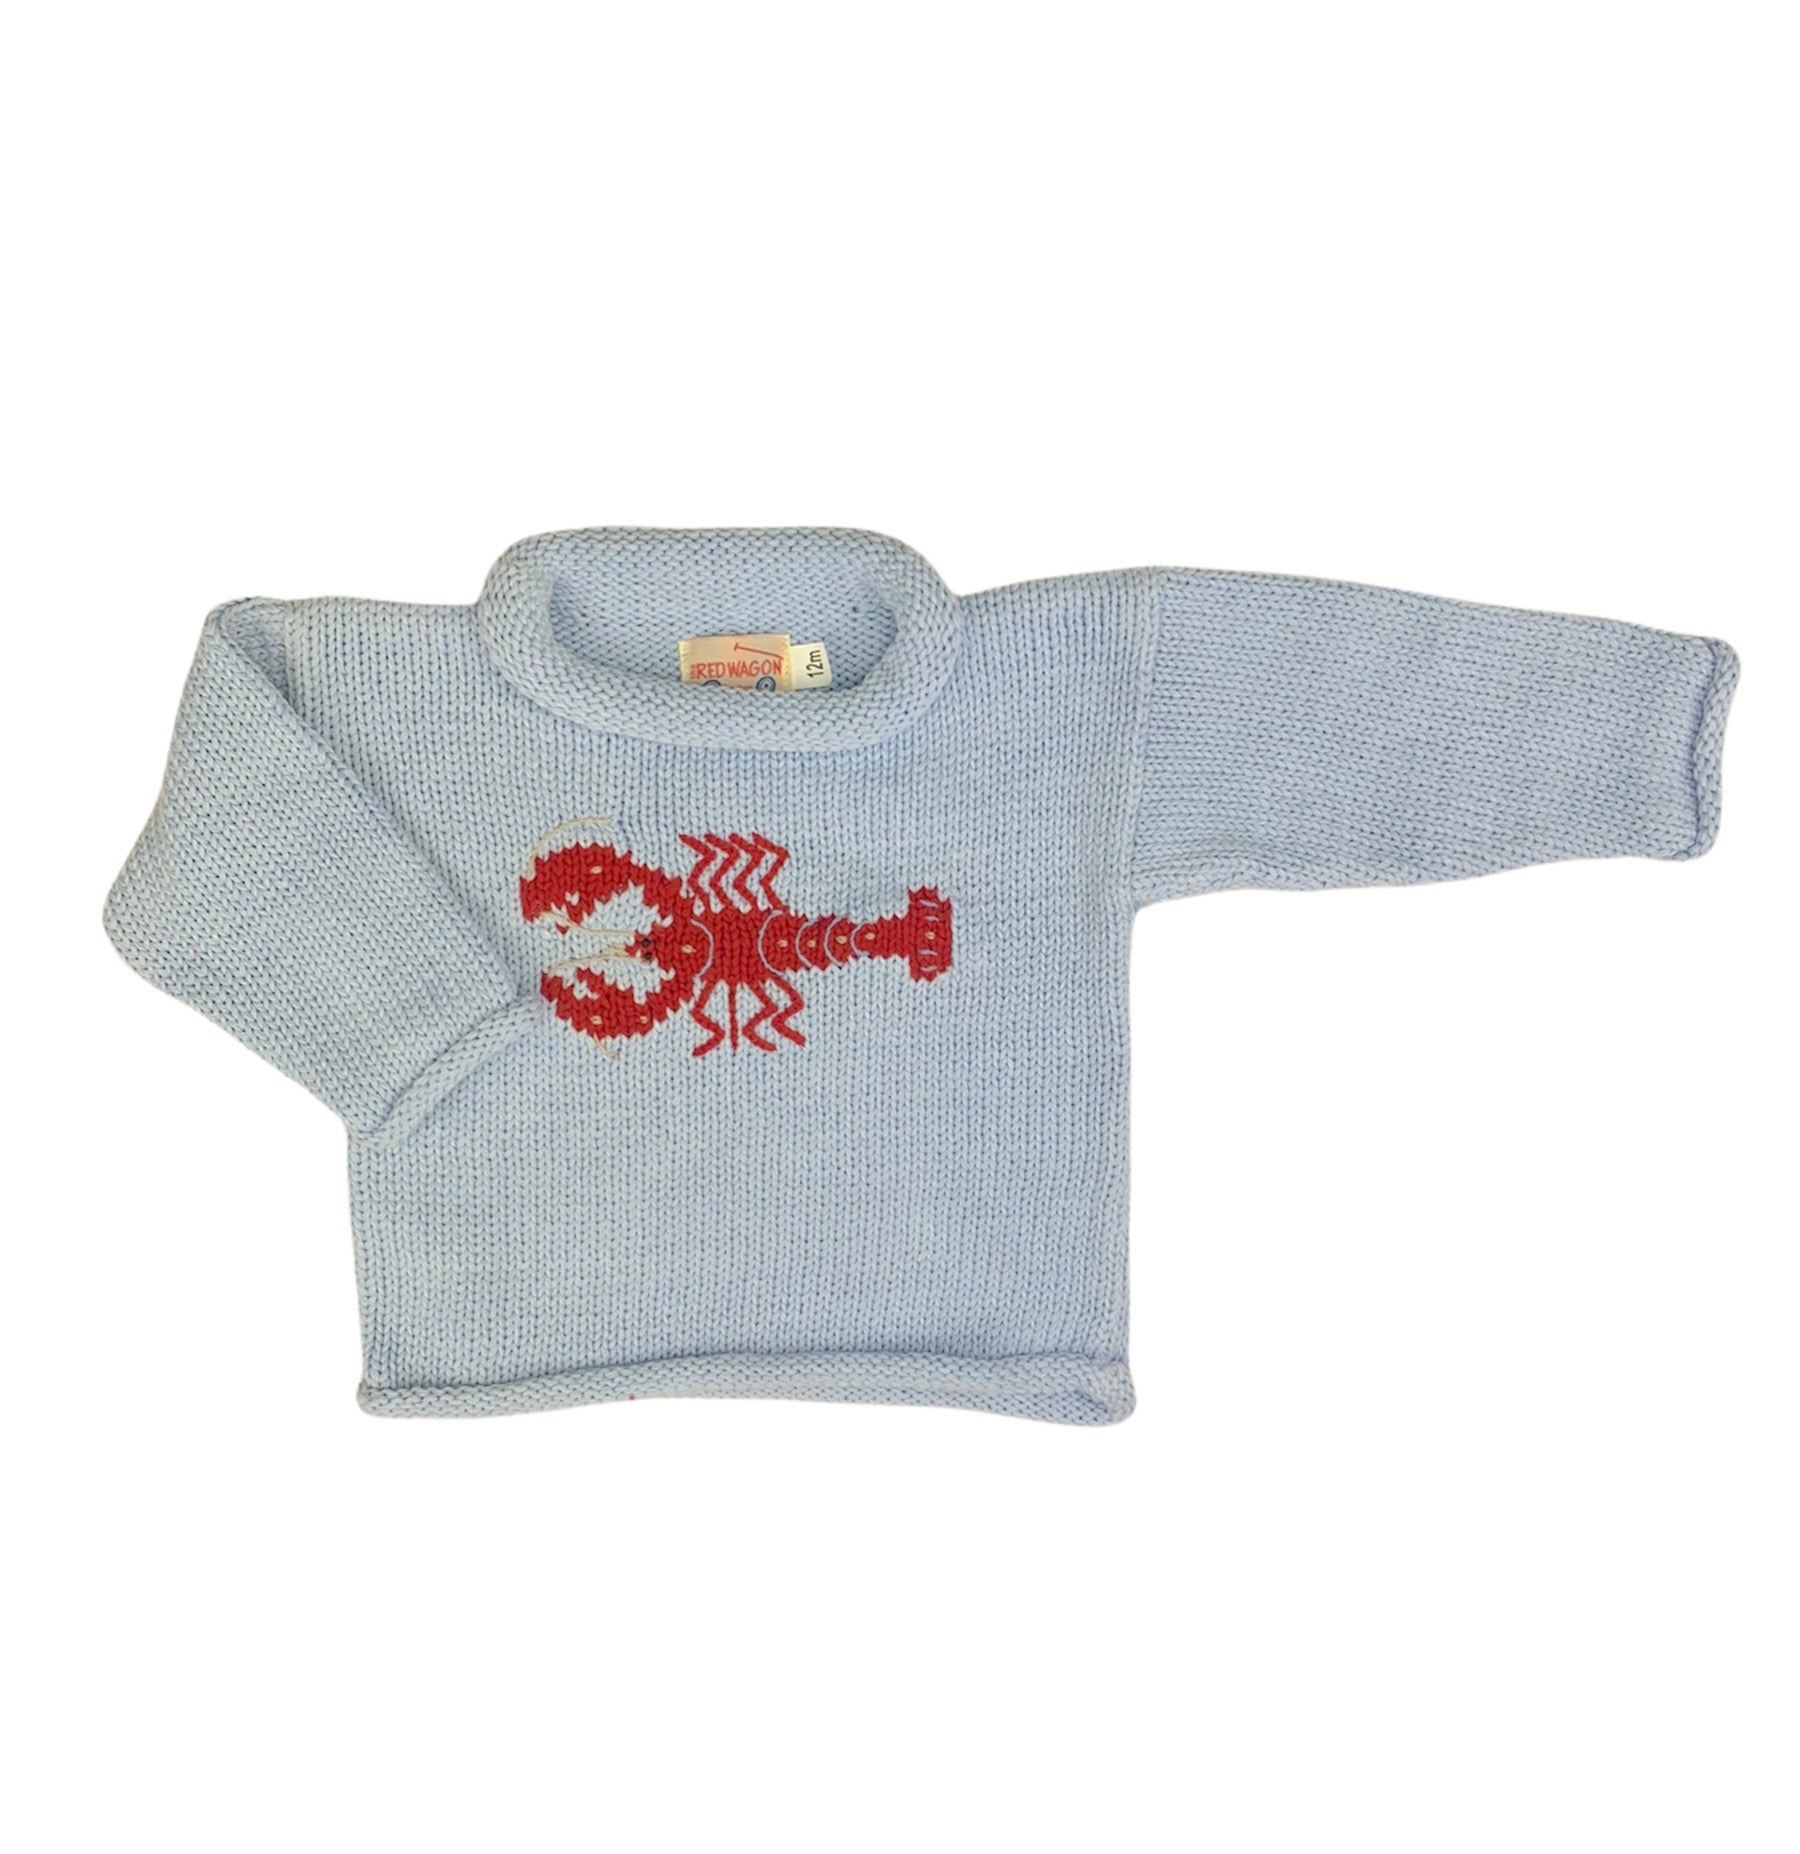 light blue sweater with red lobster in center